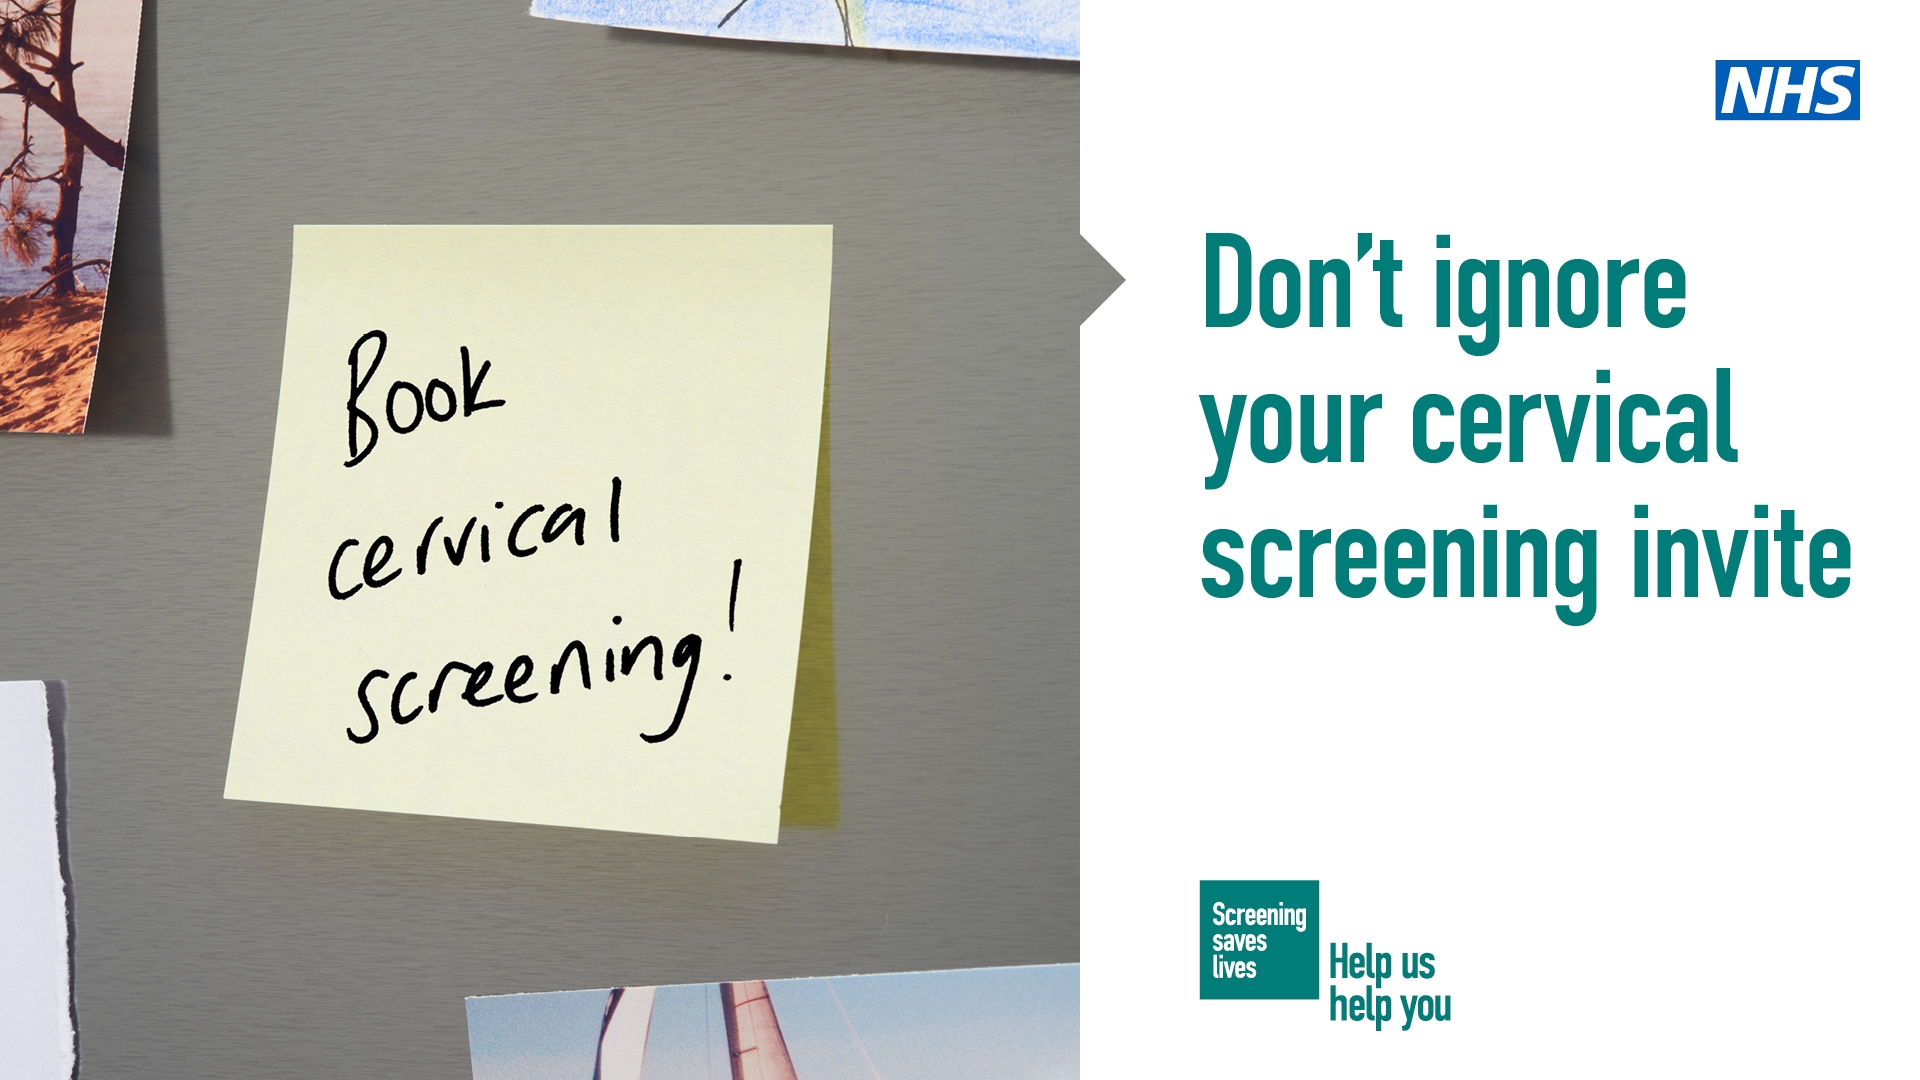 South Asian women are urged not to ignore your Cervical screening invite